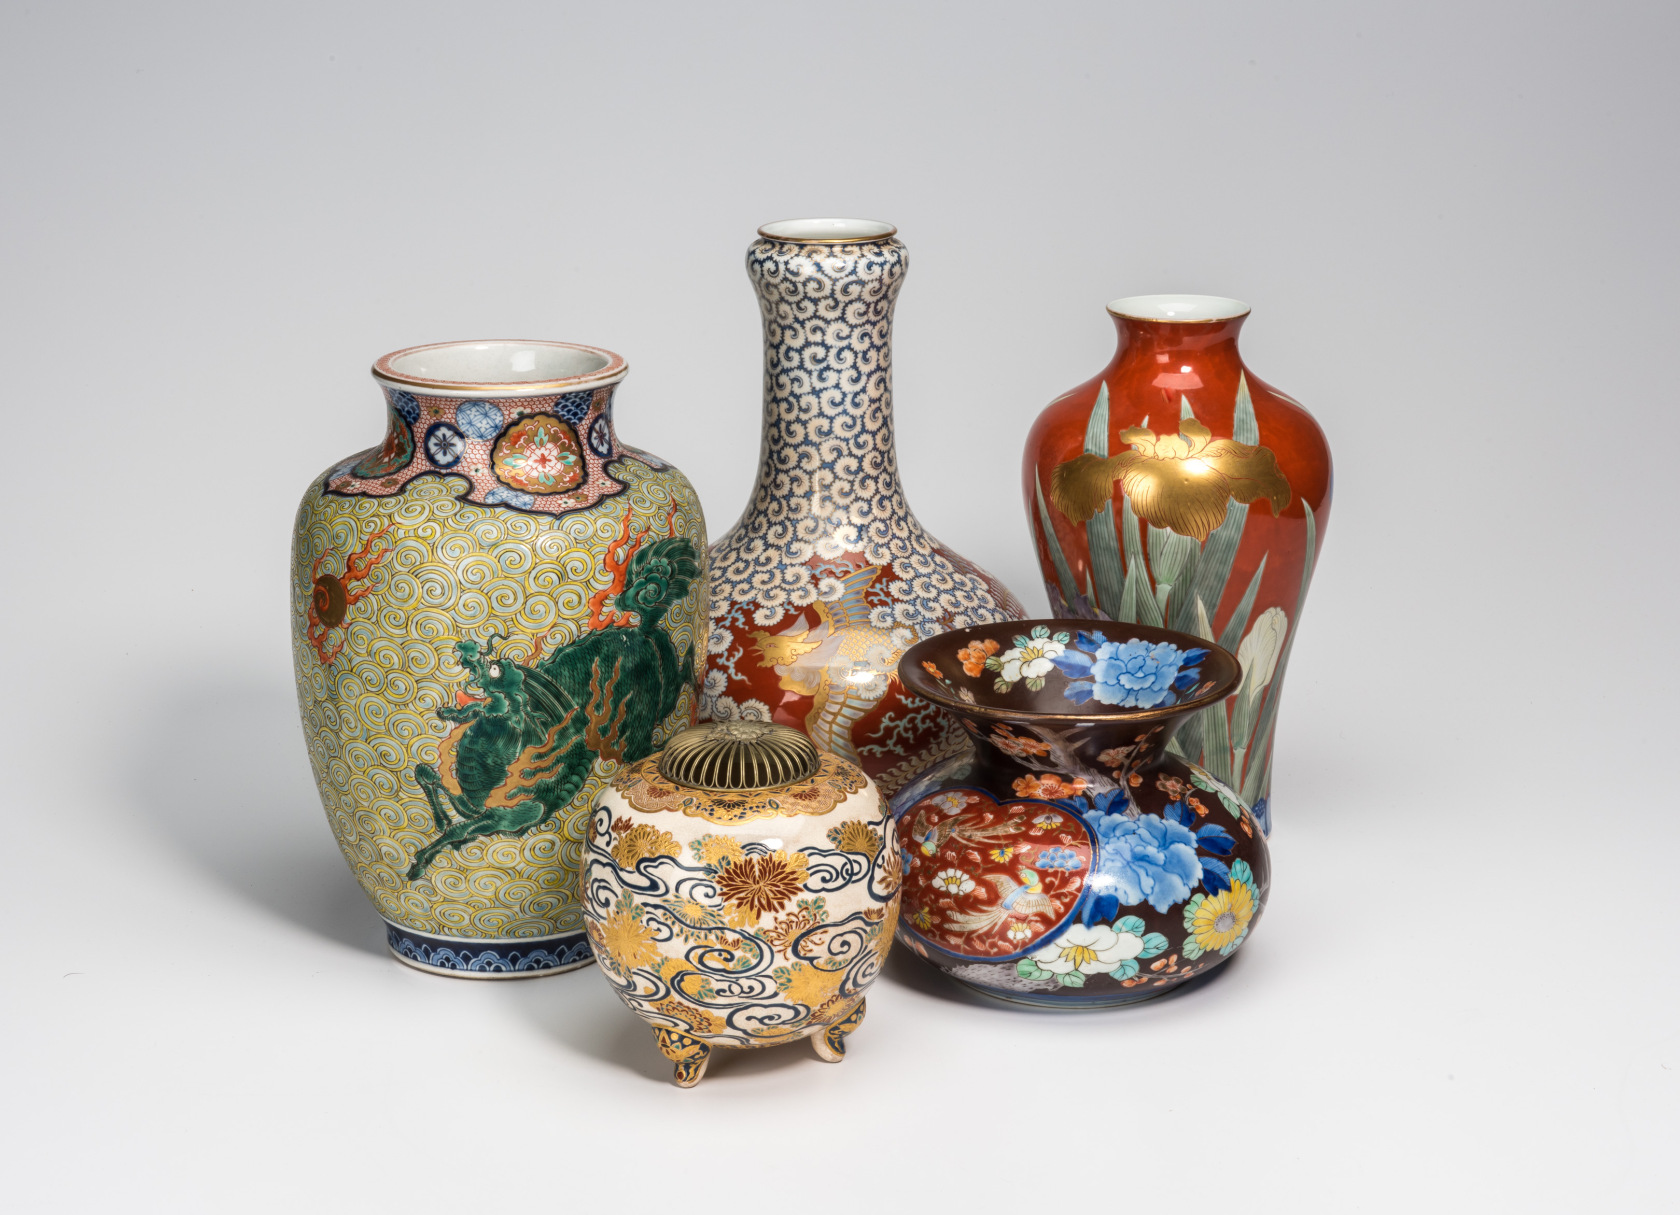 A photo of five colorfully-decorated vases in different shapes and sizes.